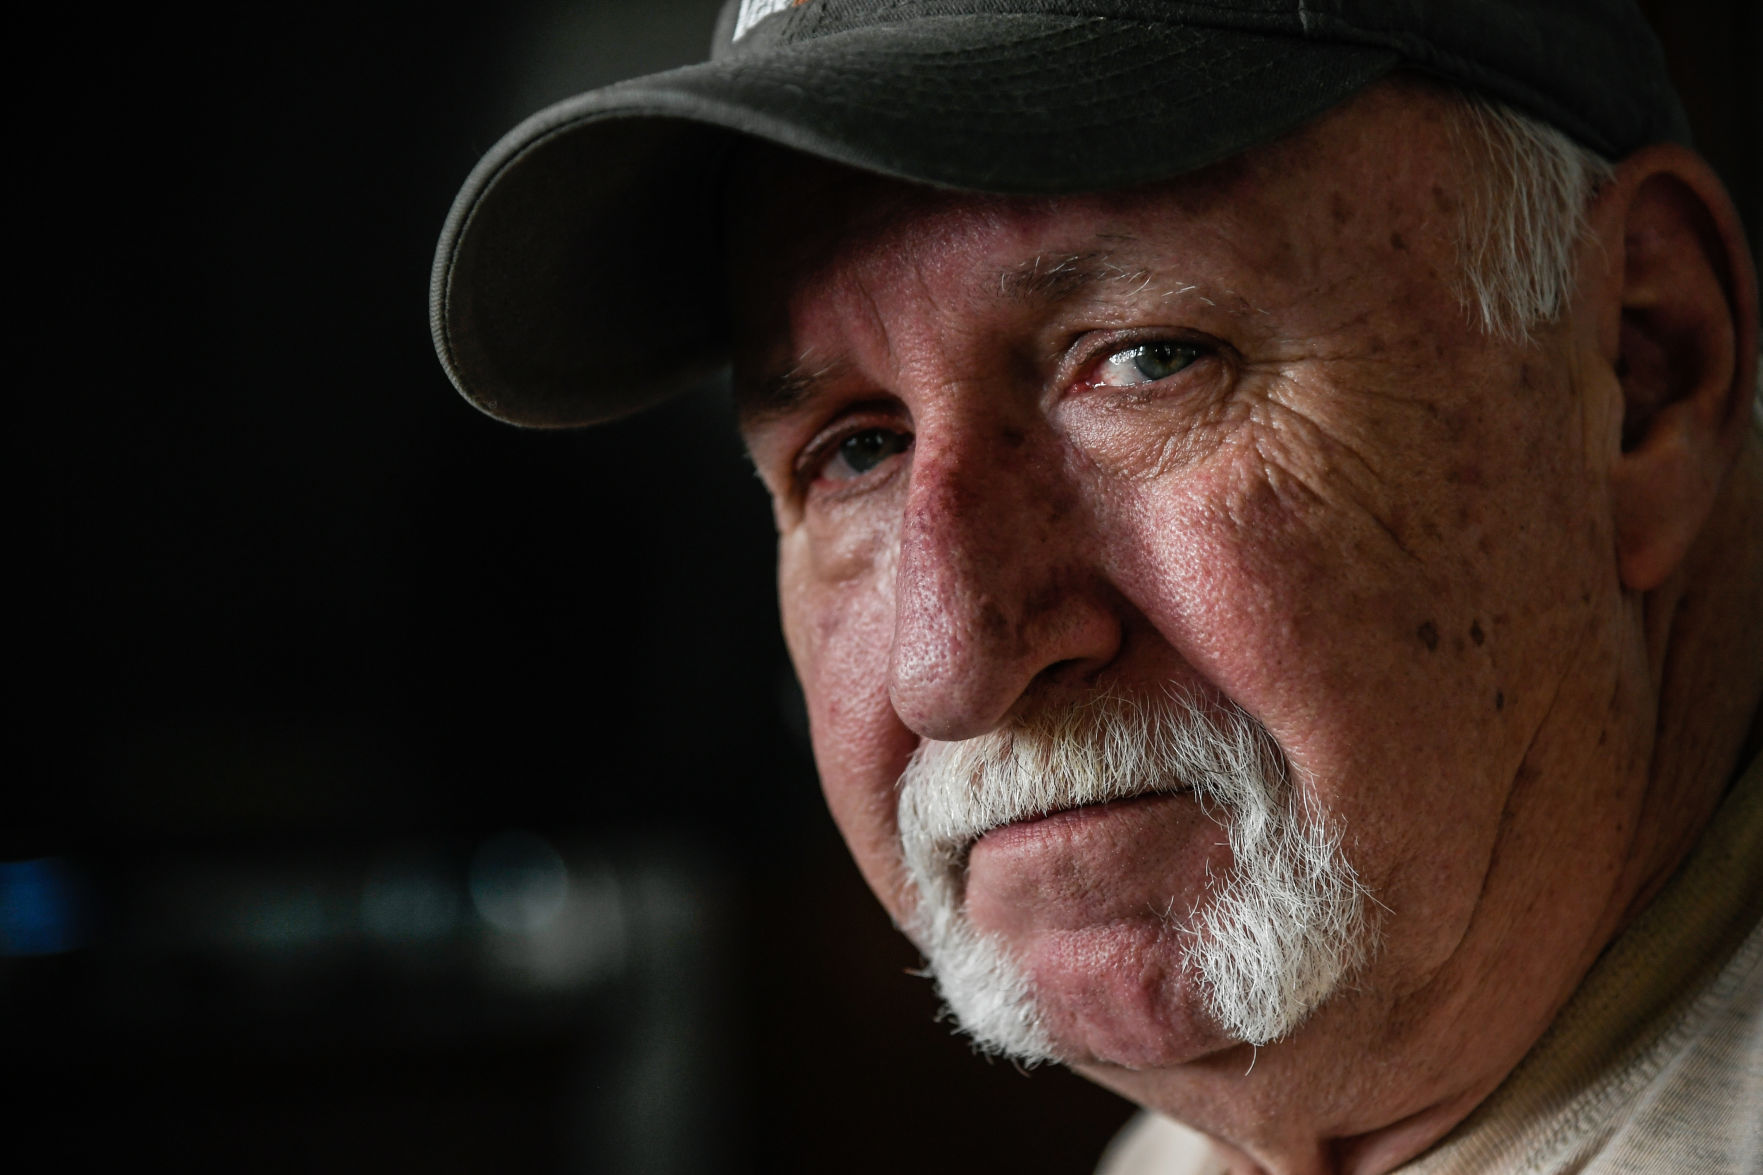 Vietnam veteran John Schmidt, of Davenport, poses for a portrait in his living room Wednesday. Schmidt, who was born in Detroit but raised in and around Reynolds, Illinois served as combat engineer from 1967 to 1971.